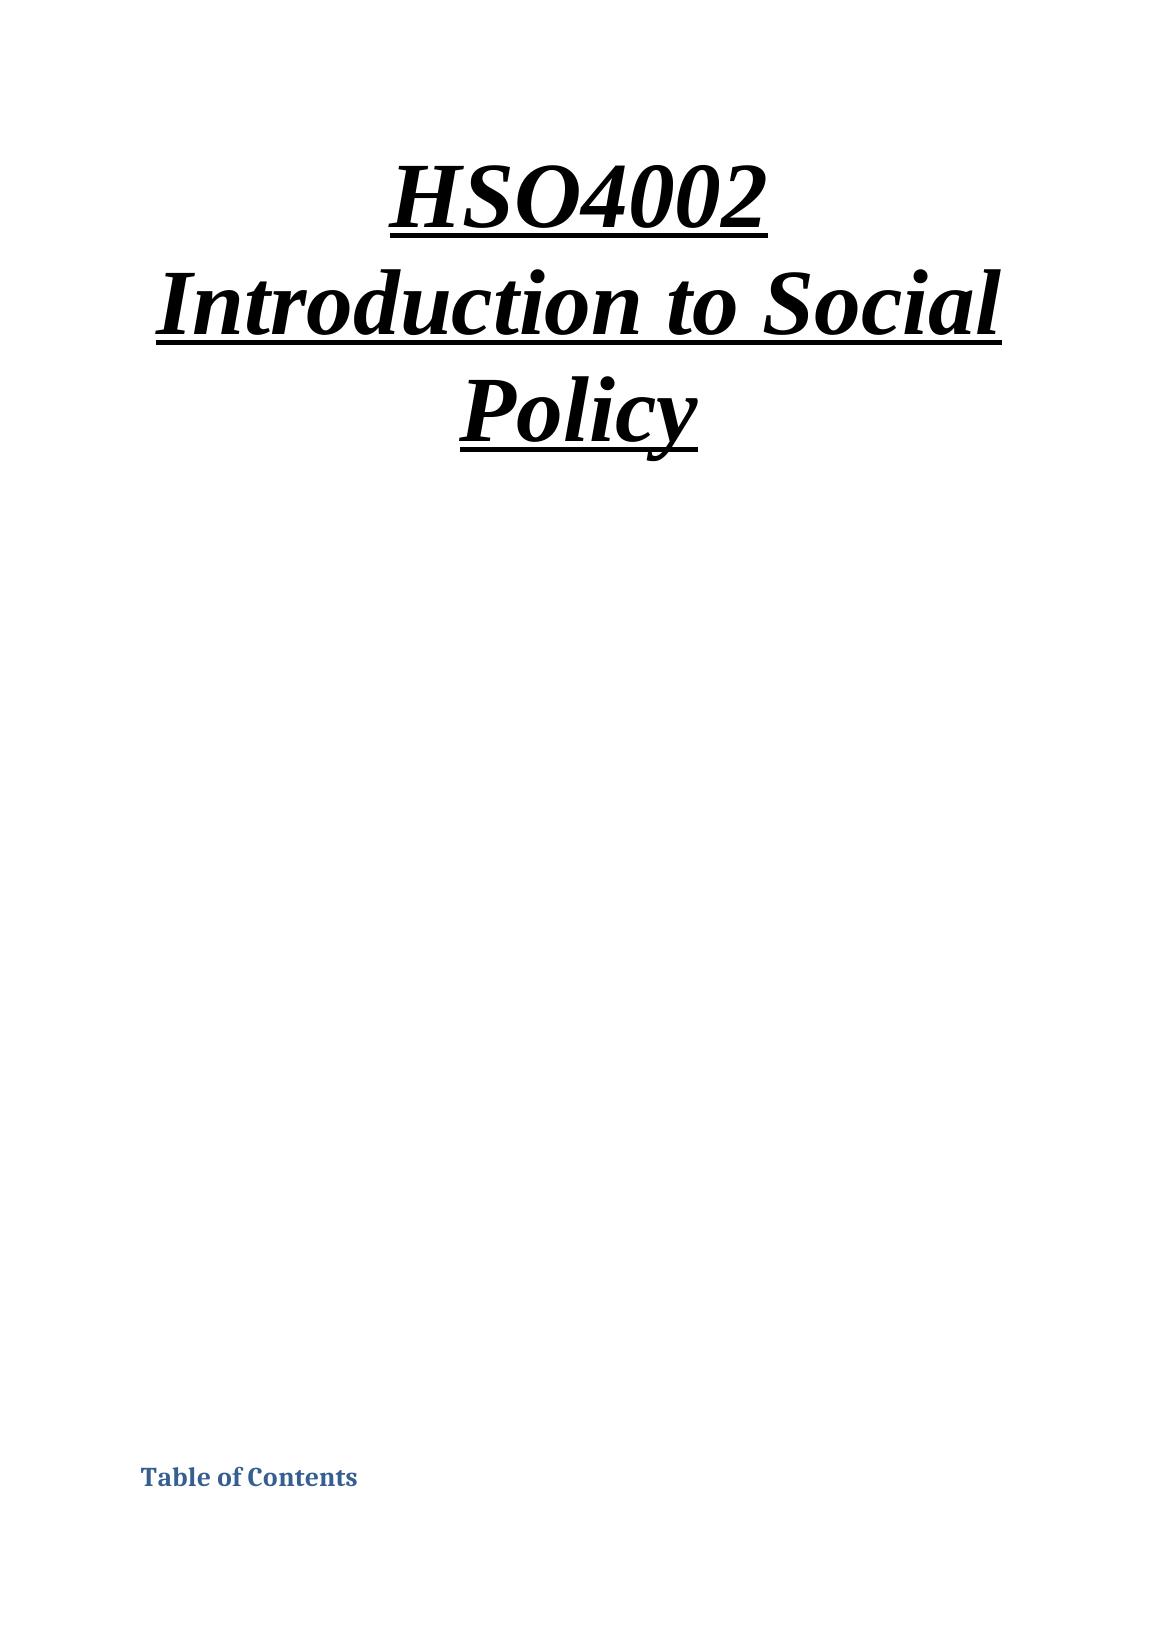 Founding Principles of Welfare State and Change in Ideology_1